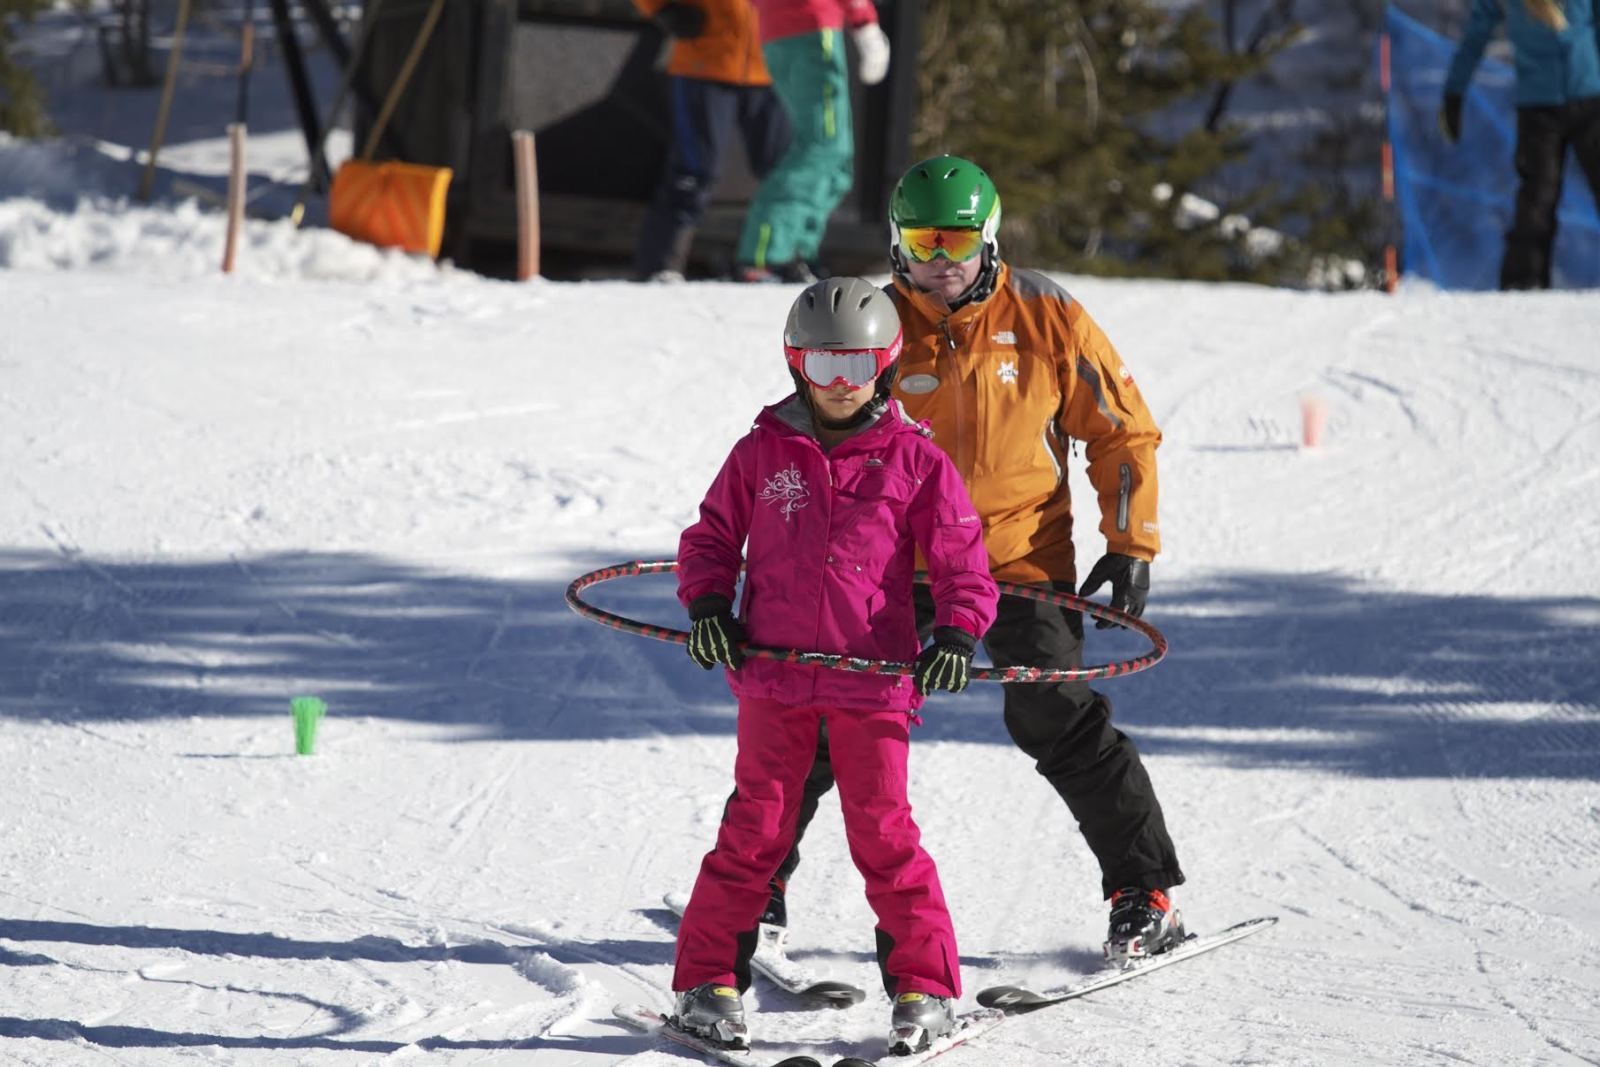 Learning to Ski and Ride: Why Multi-Day Lessons Win